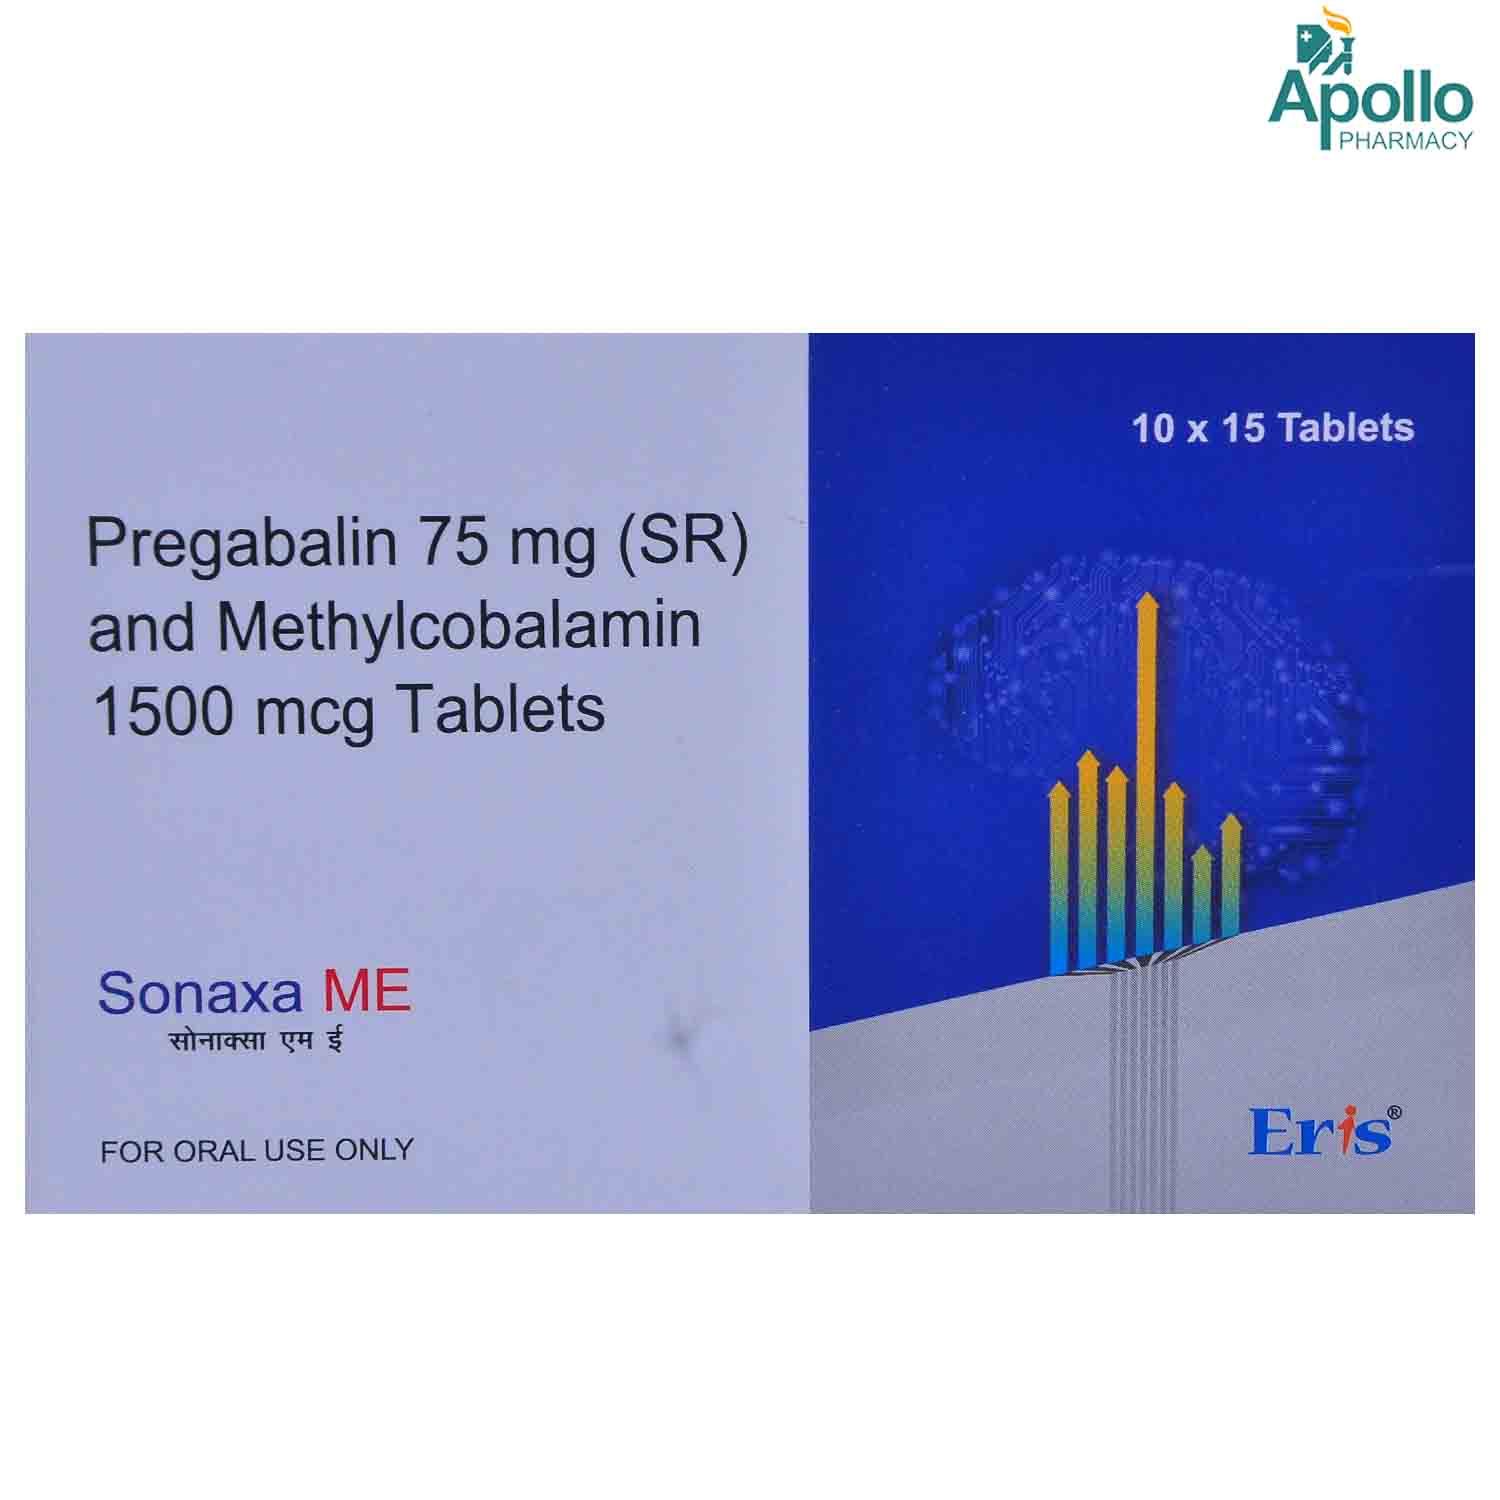 Sonaxa ME Tablet 15's, Pack of 15 TABLETS